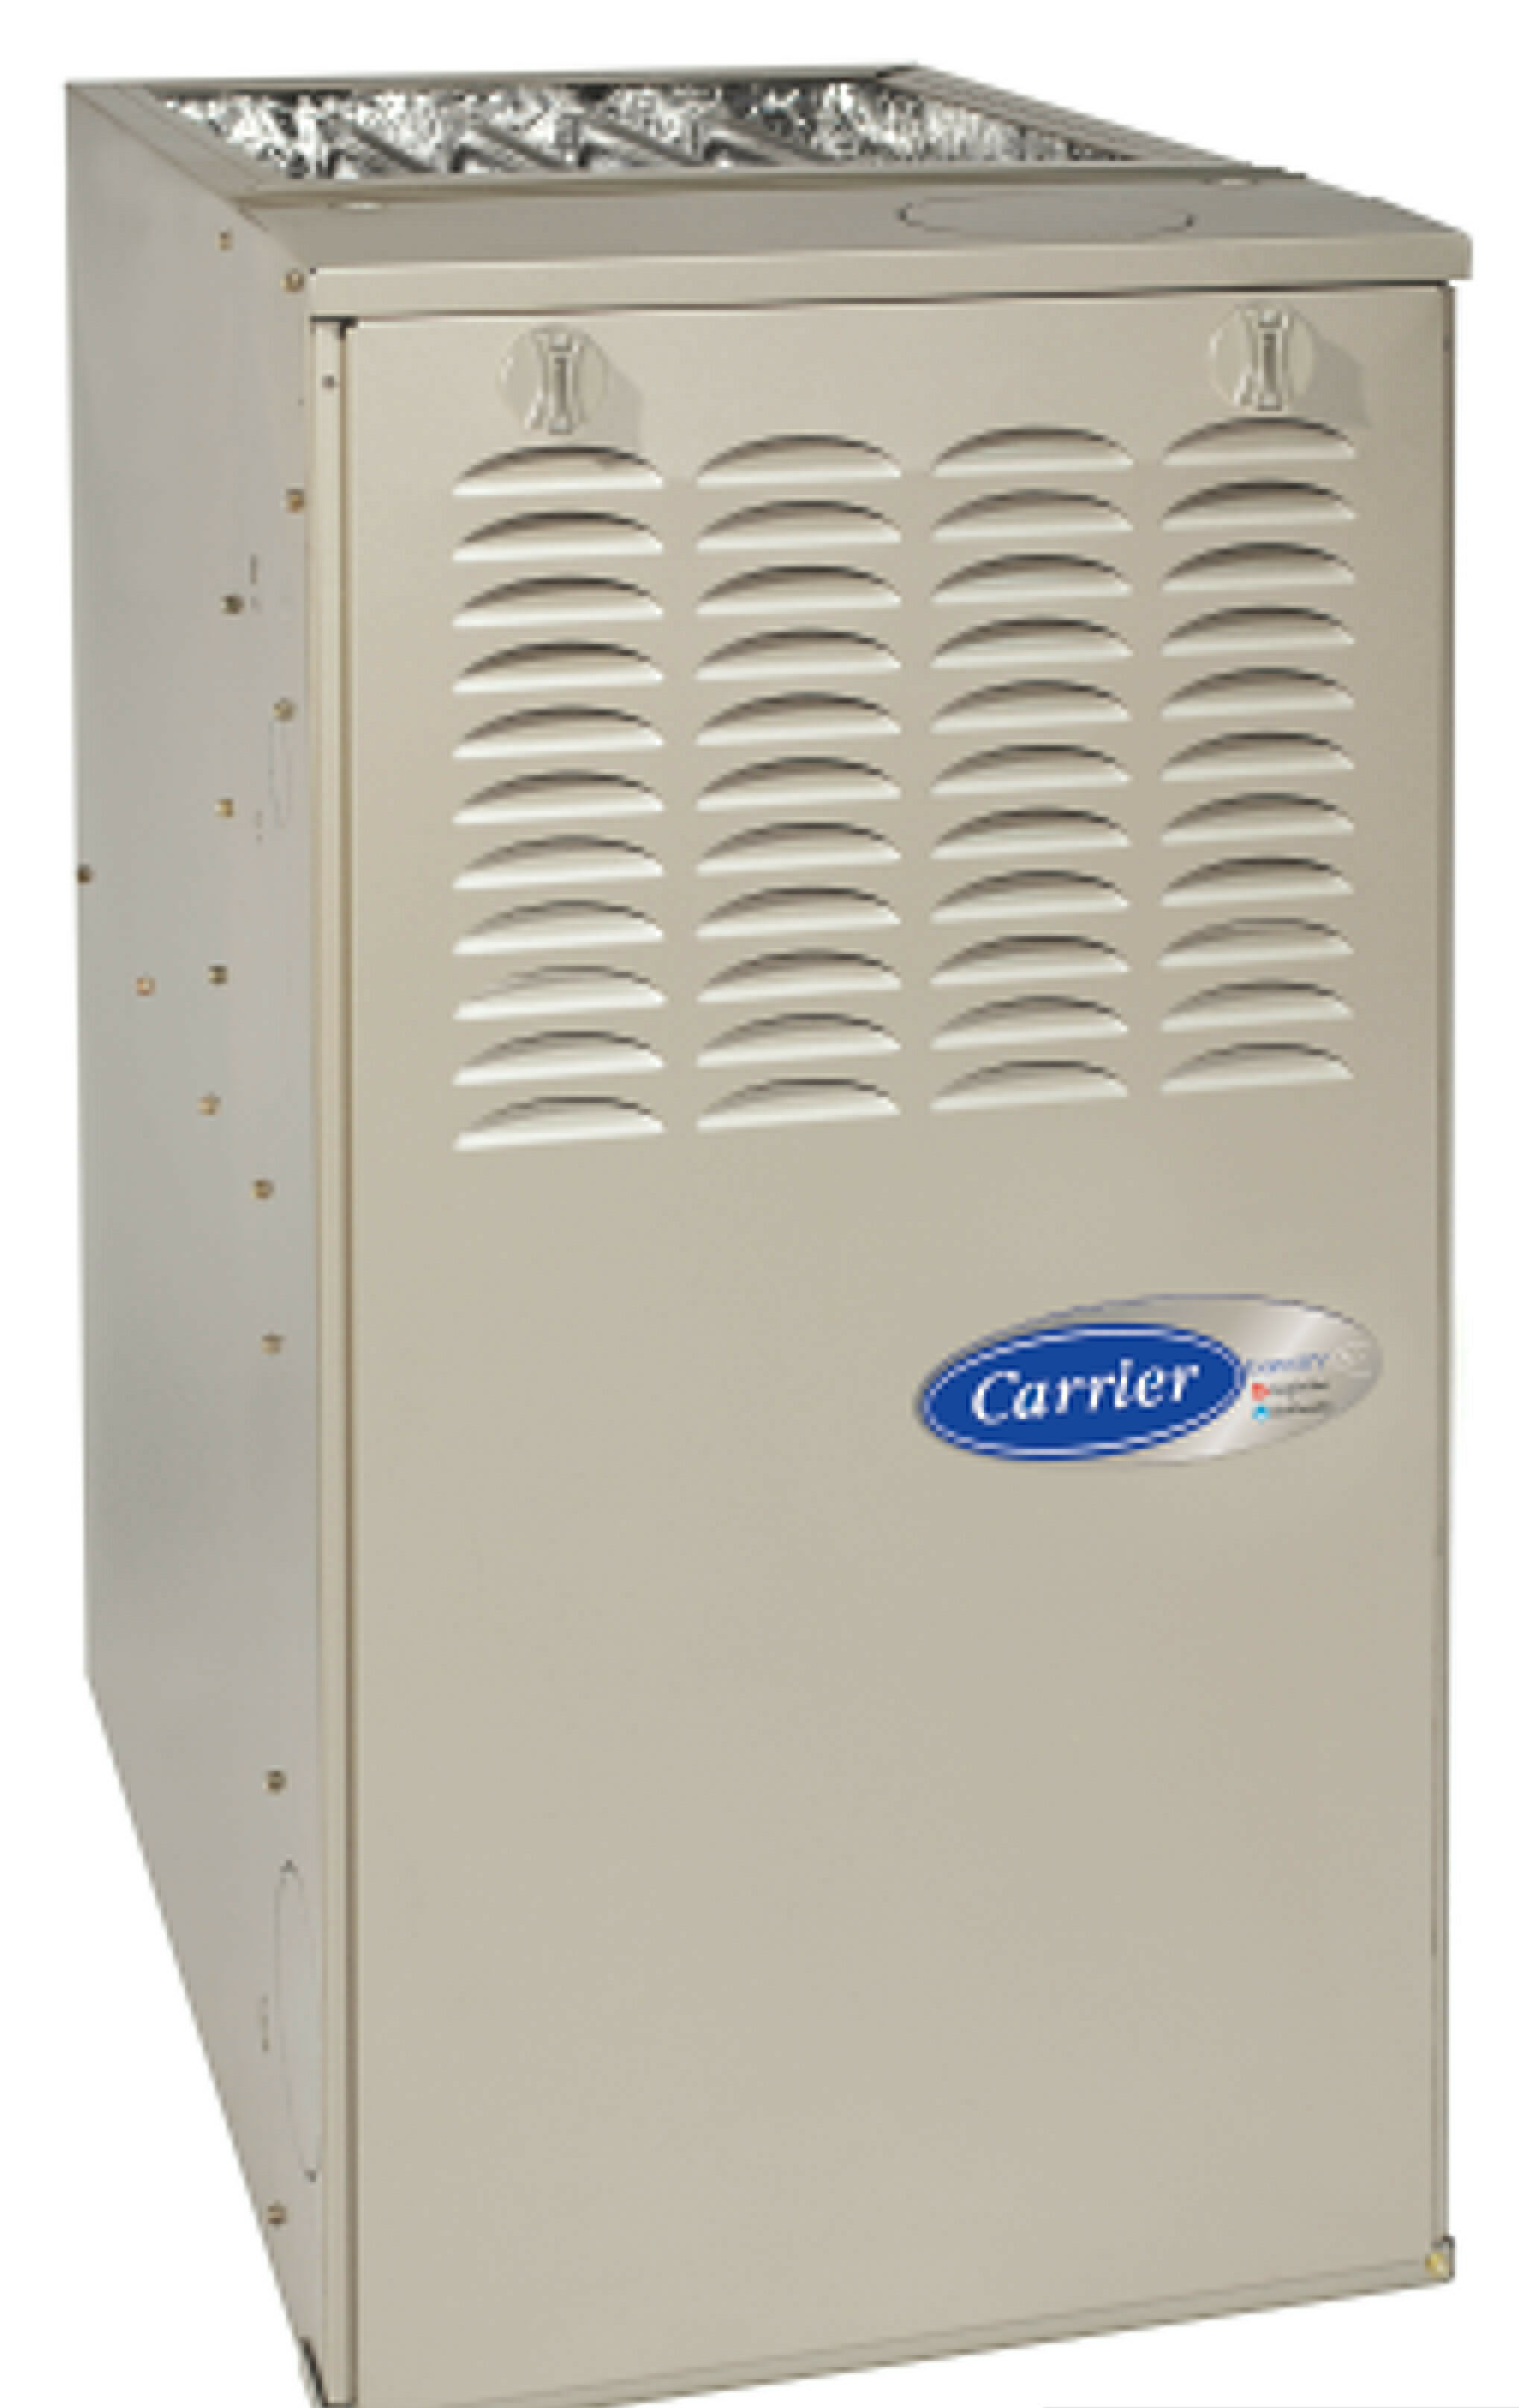 Carrier high efficiency heating system from Warren Heating and Cooling